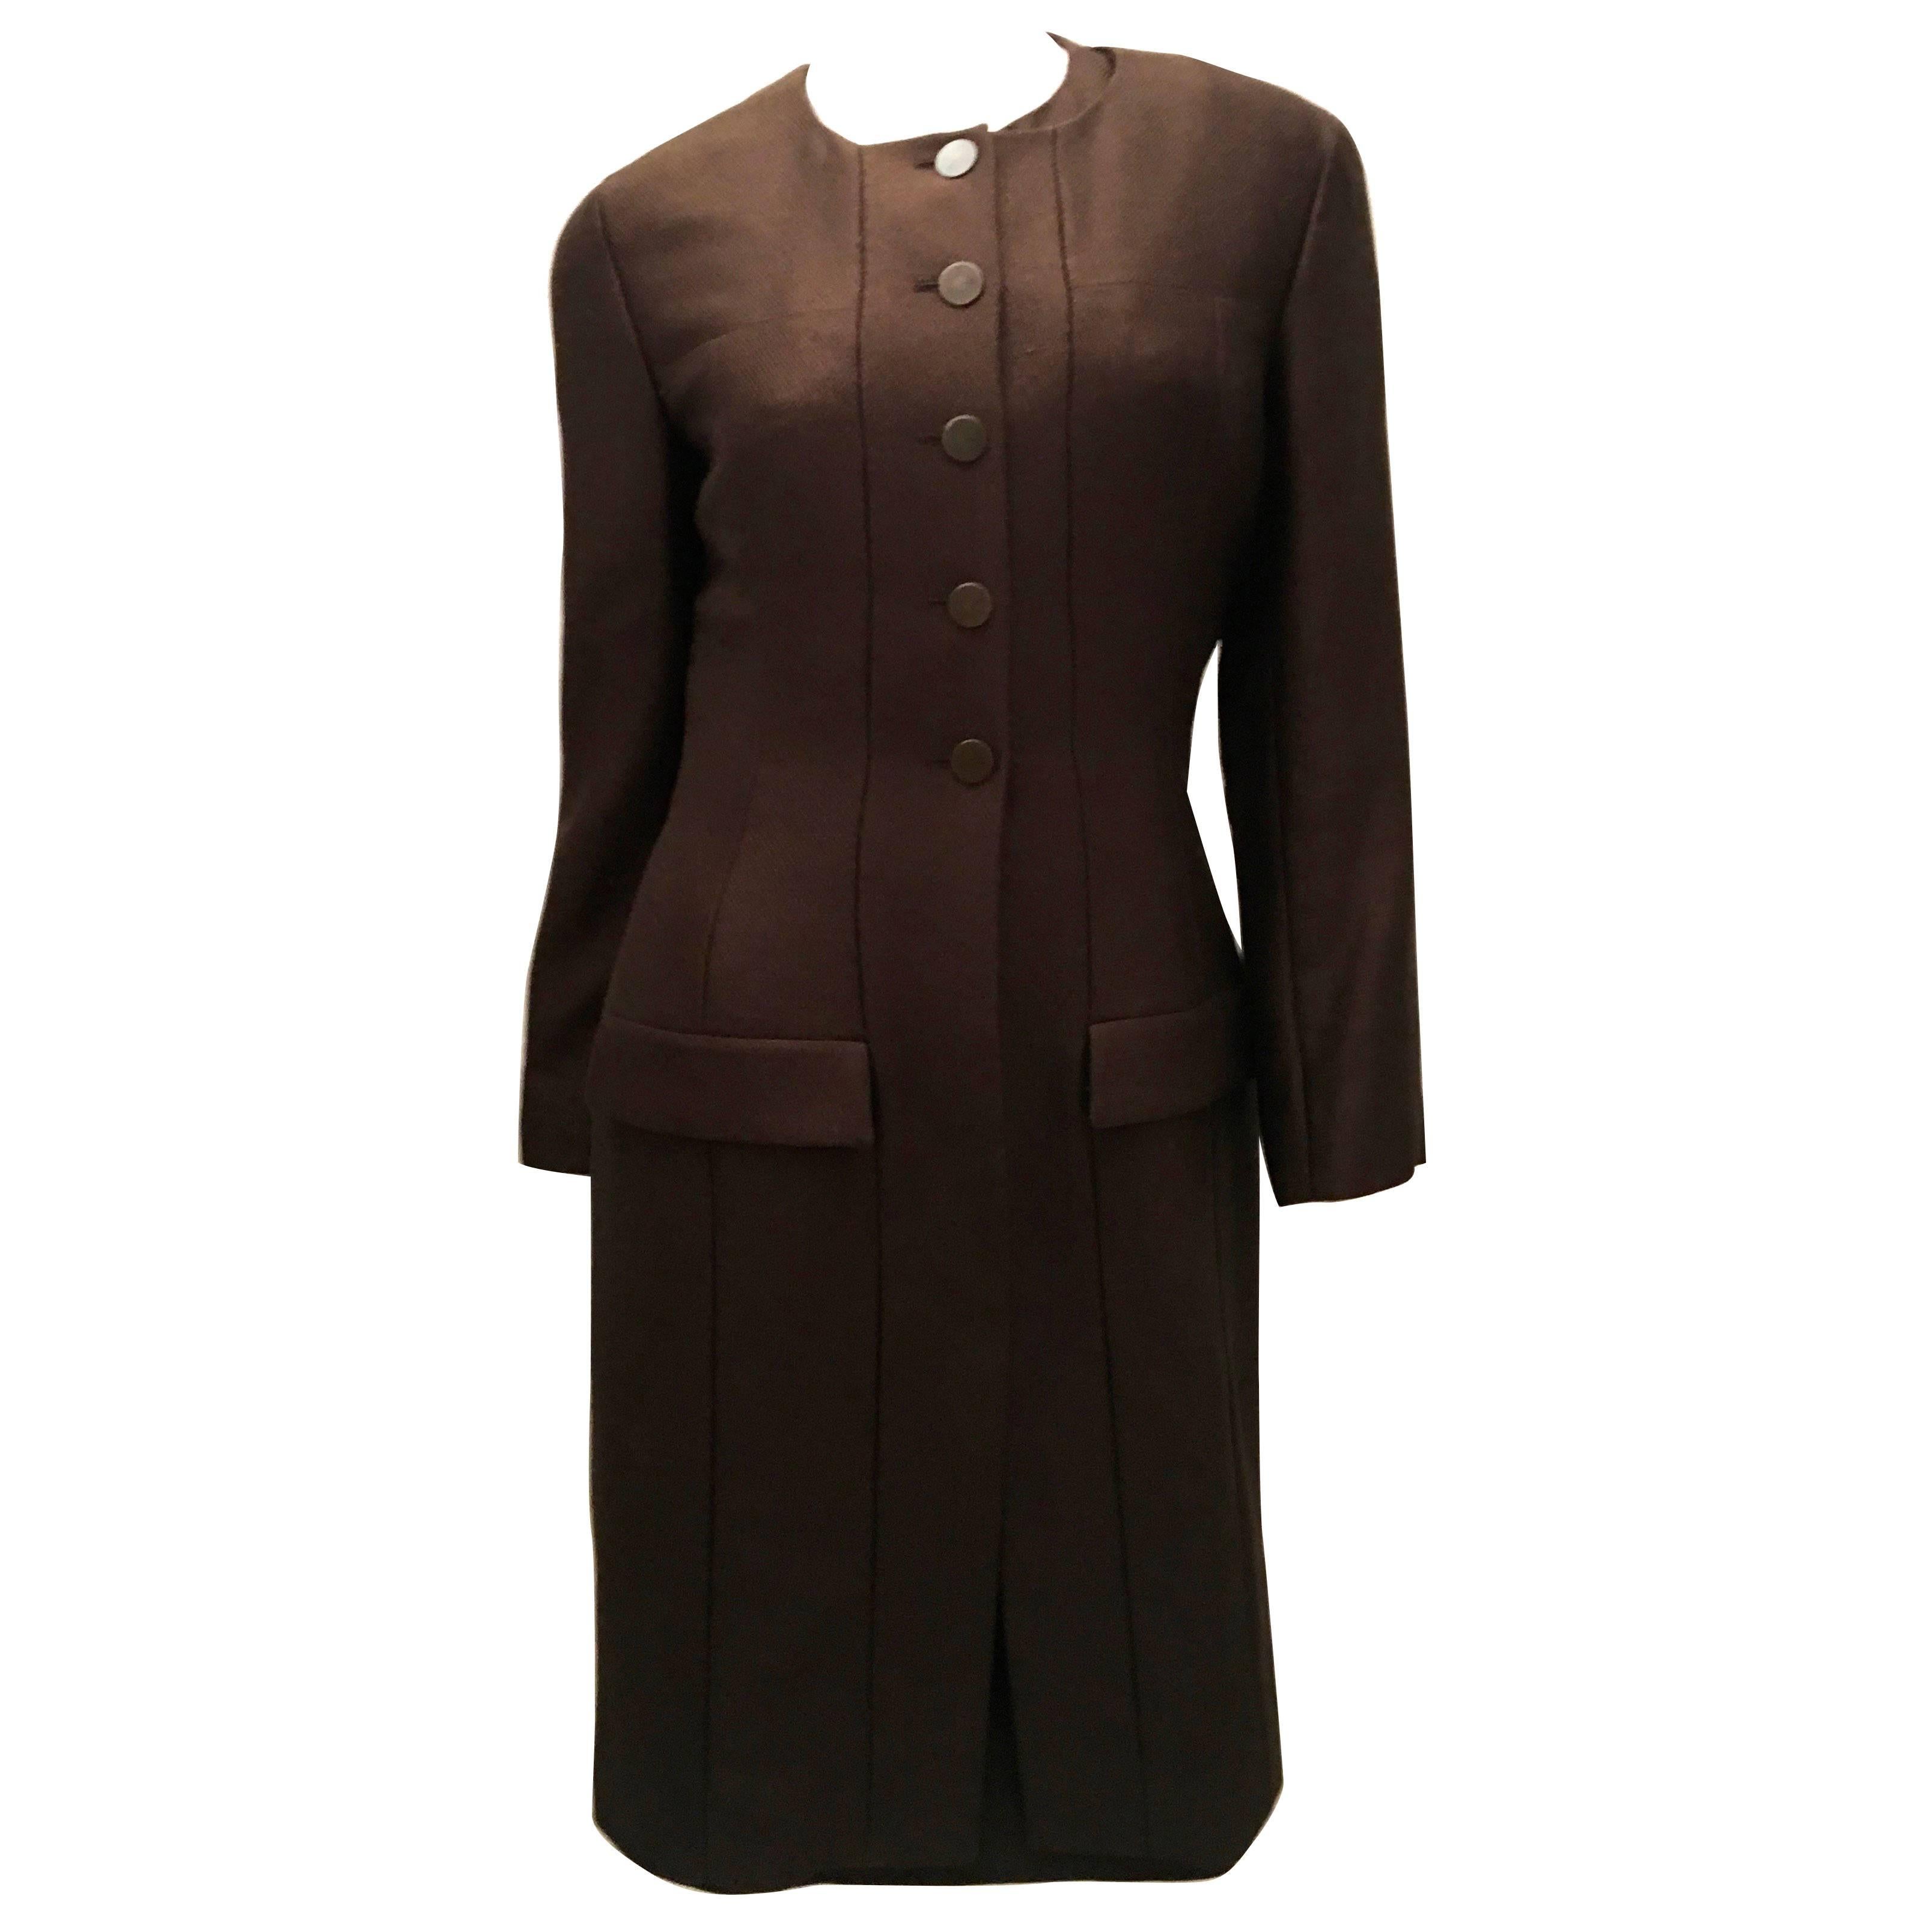 Chanel Coat w/ Matching Dress - Mint Condition - Absolutely Flawless For Sale